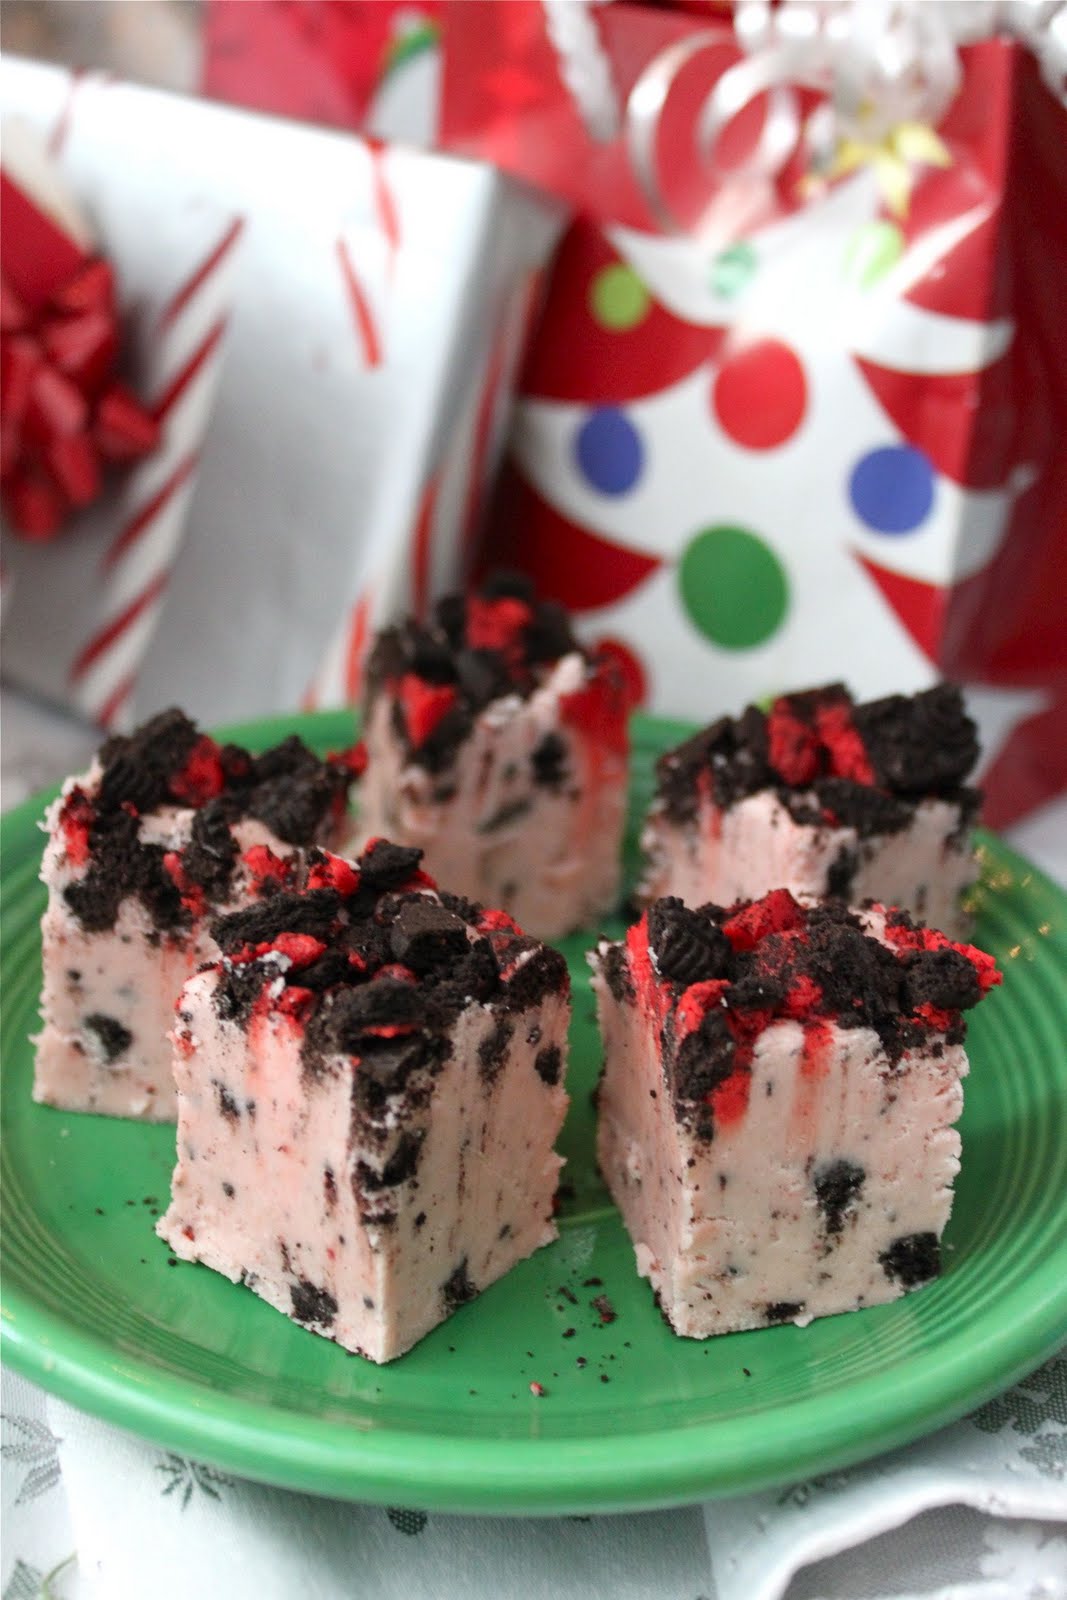 Baked Perfection: Cookies and Cream Fudge